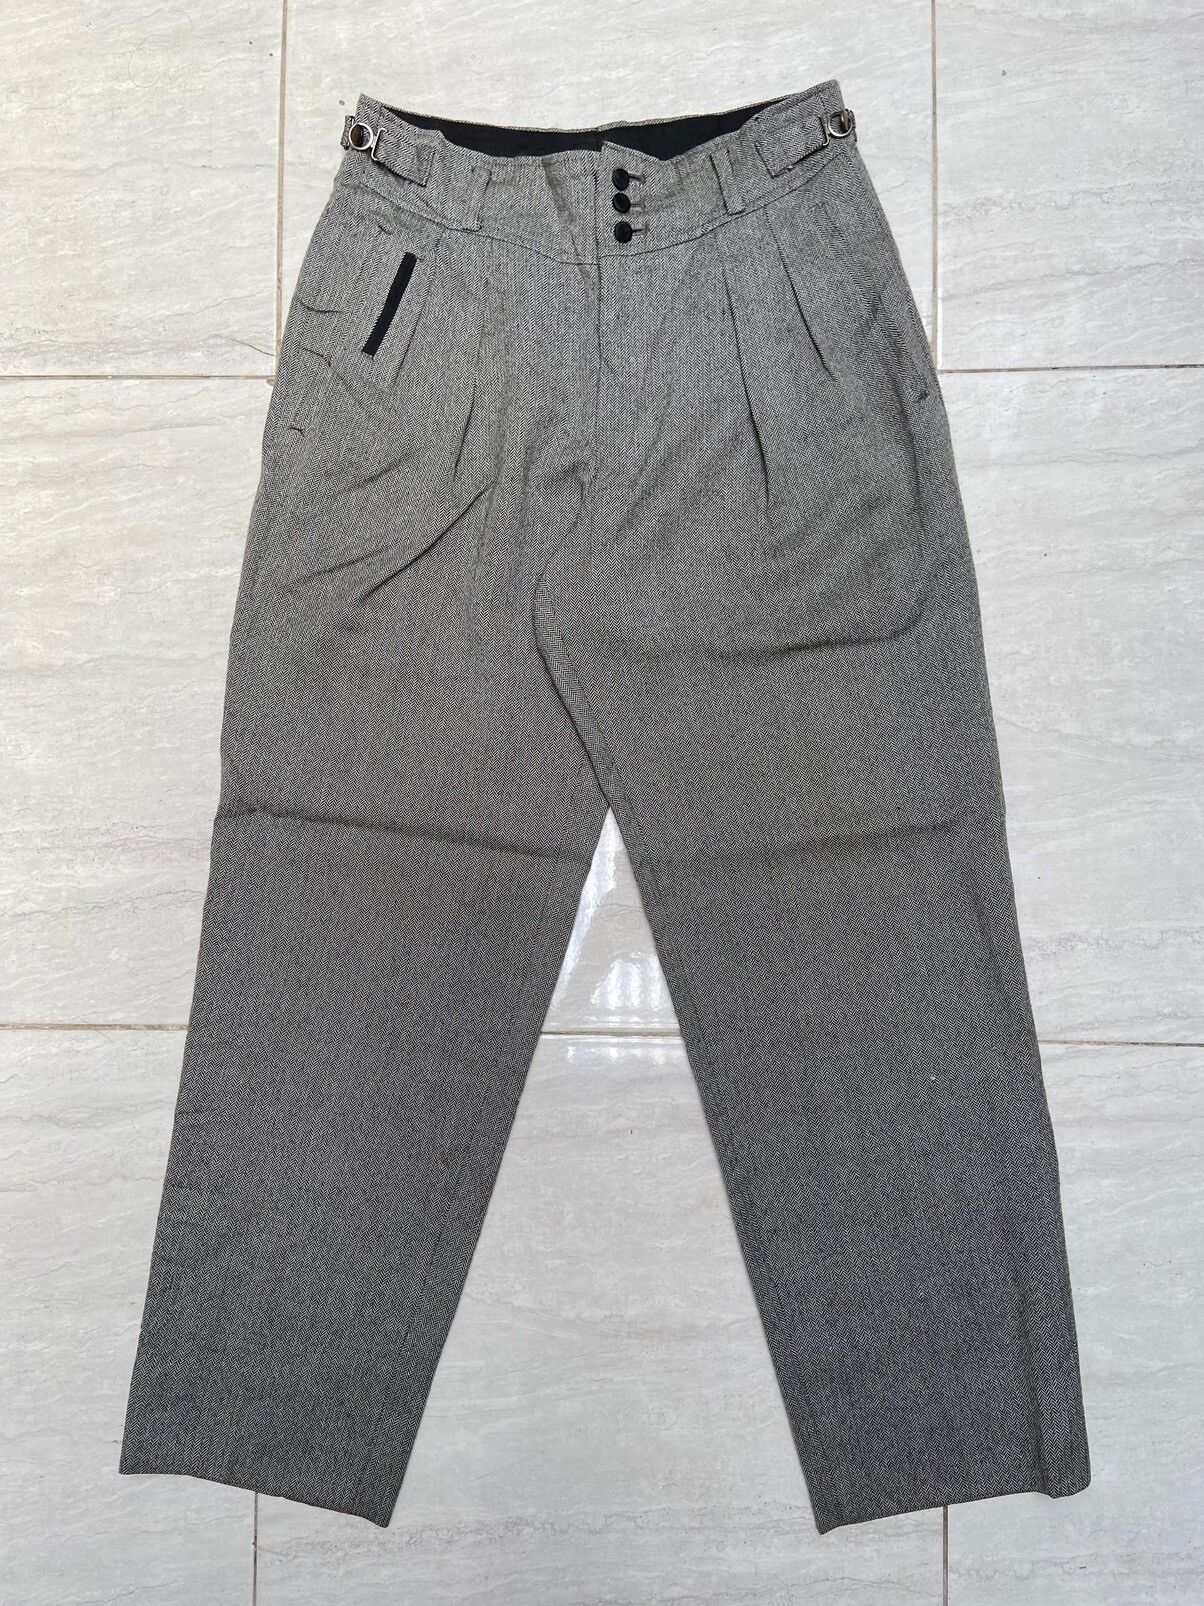 Issey Miyake FICCE RAZZA Made in Japan Long Pants | Grailed